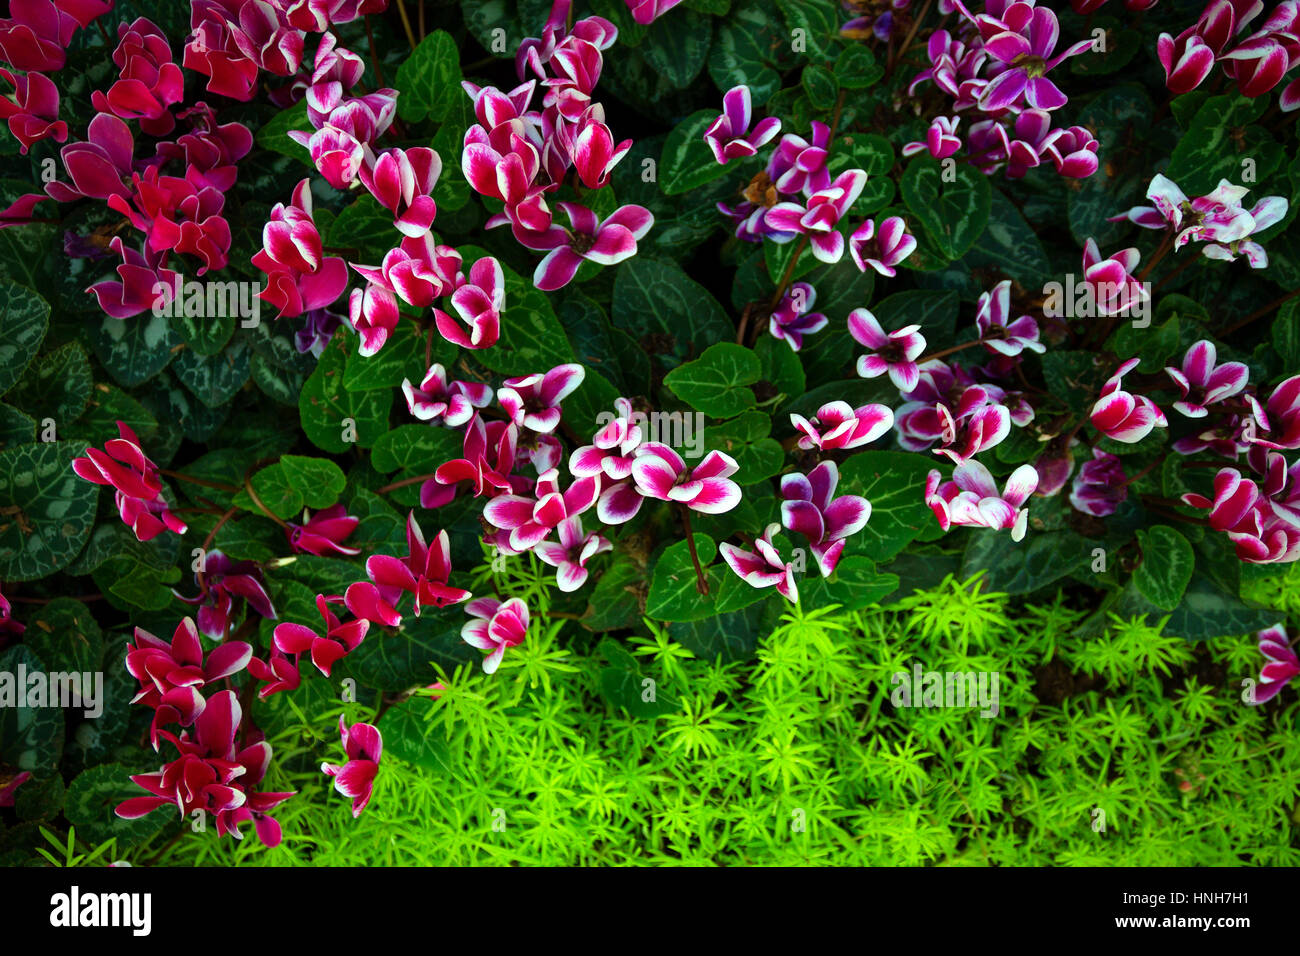 nature spring background pink cyclamen flowers surrounded by green leaves and greenery sedum close up Stock Photo